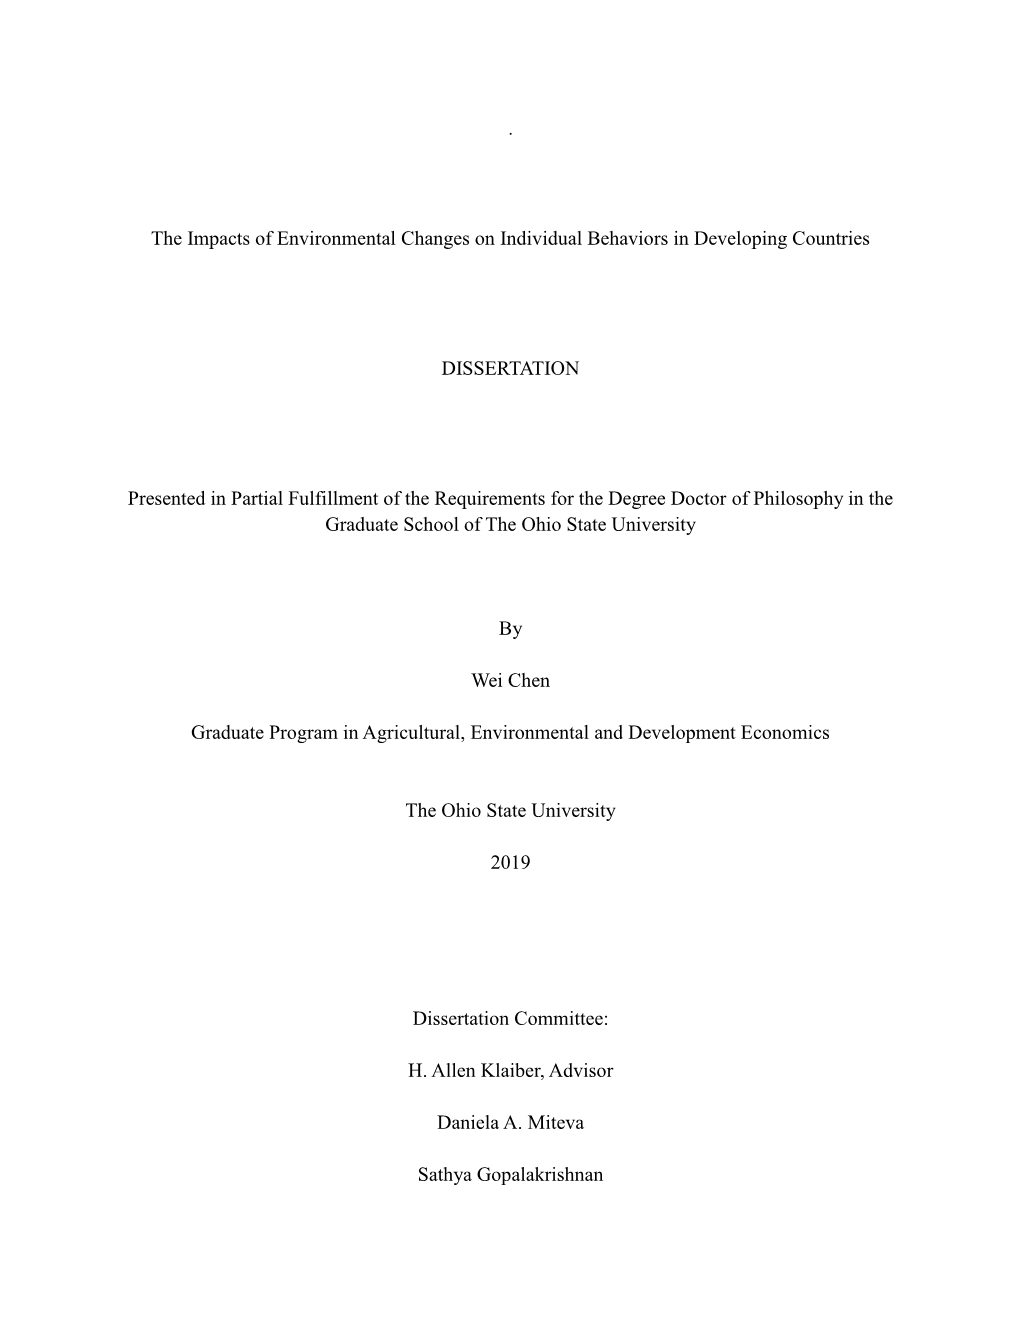 The Impacts of Environmental Changes on Individual Behaviors in Developing Countries DISSERTATION Presented in Partial Fulfil